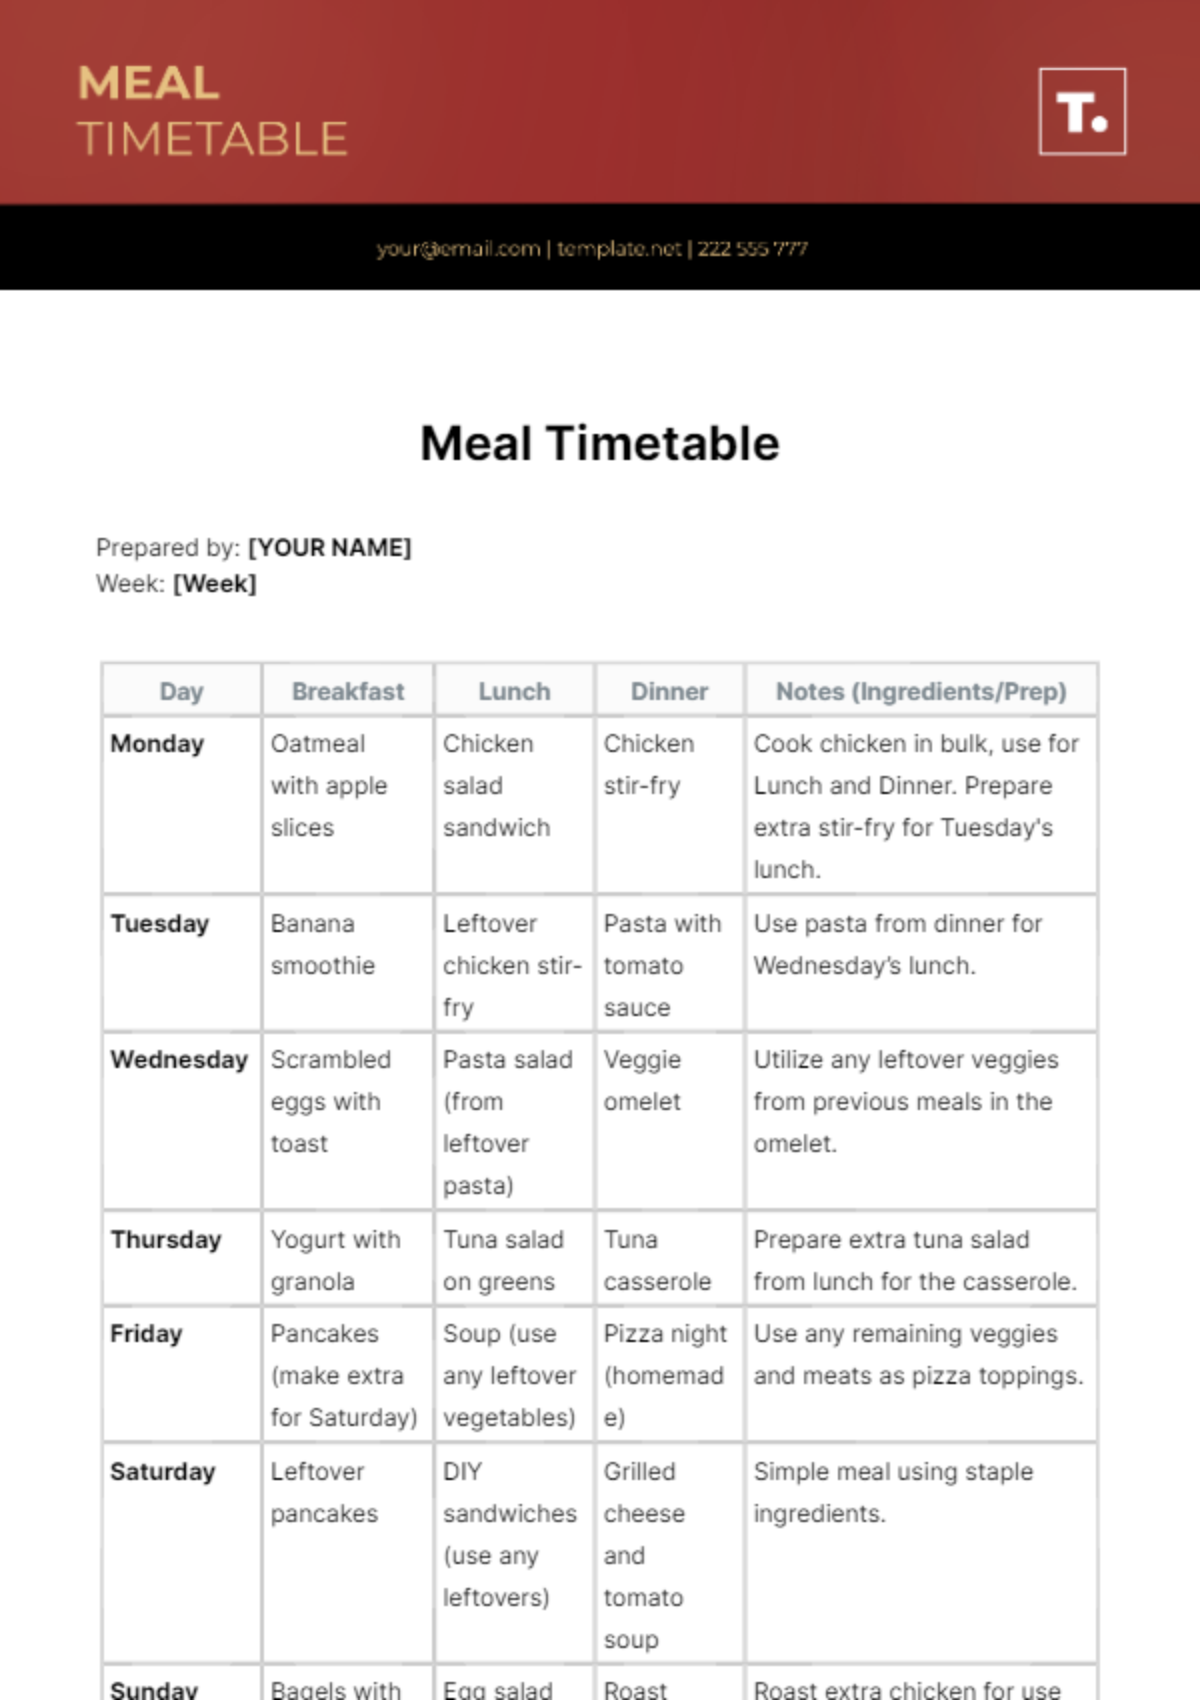 Free Meal Timetable Template